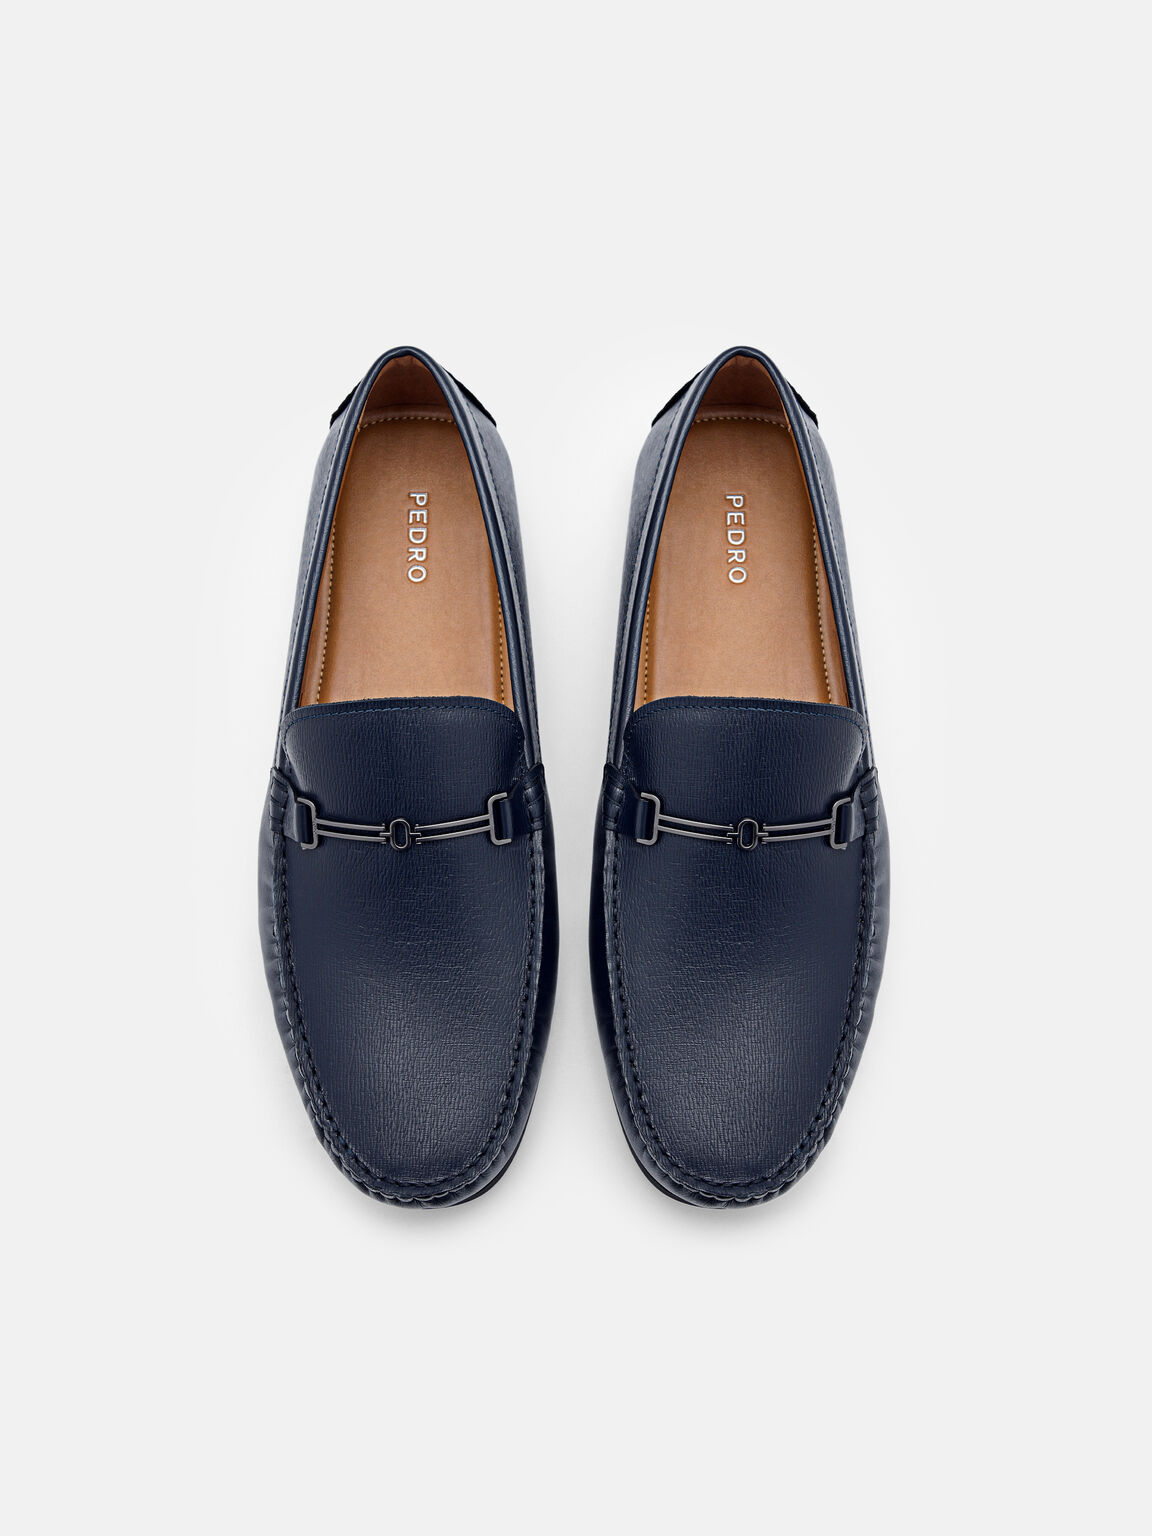 Anthony Leather Driving Shoes, Navy